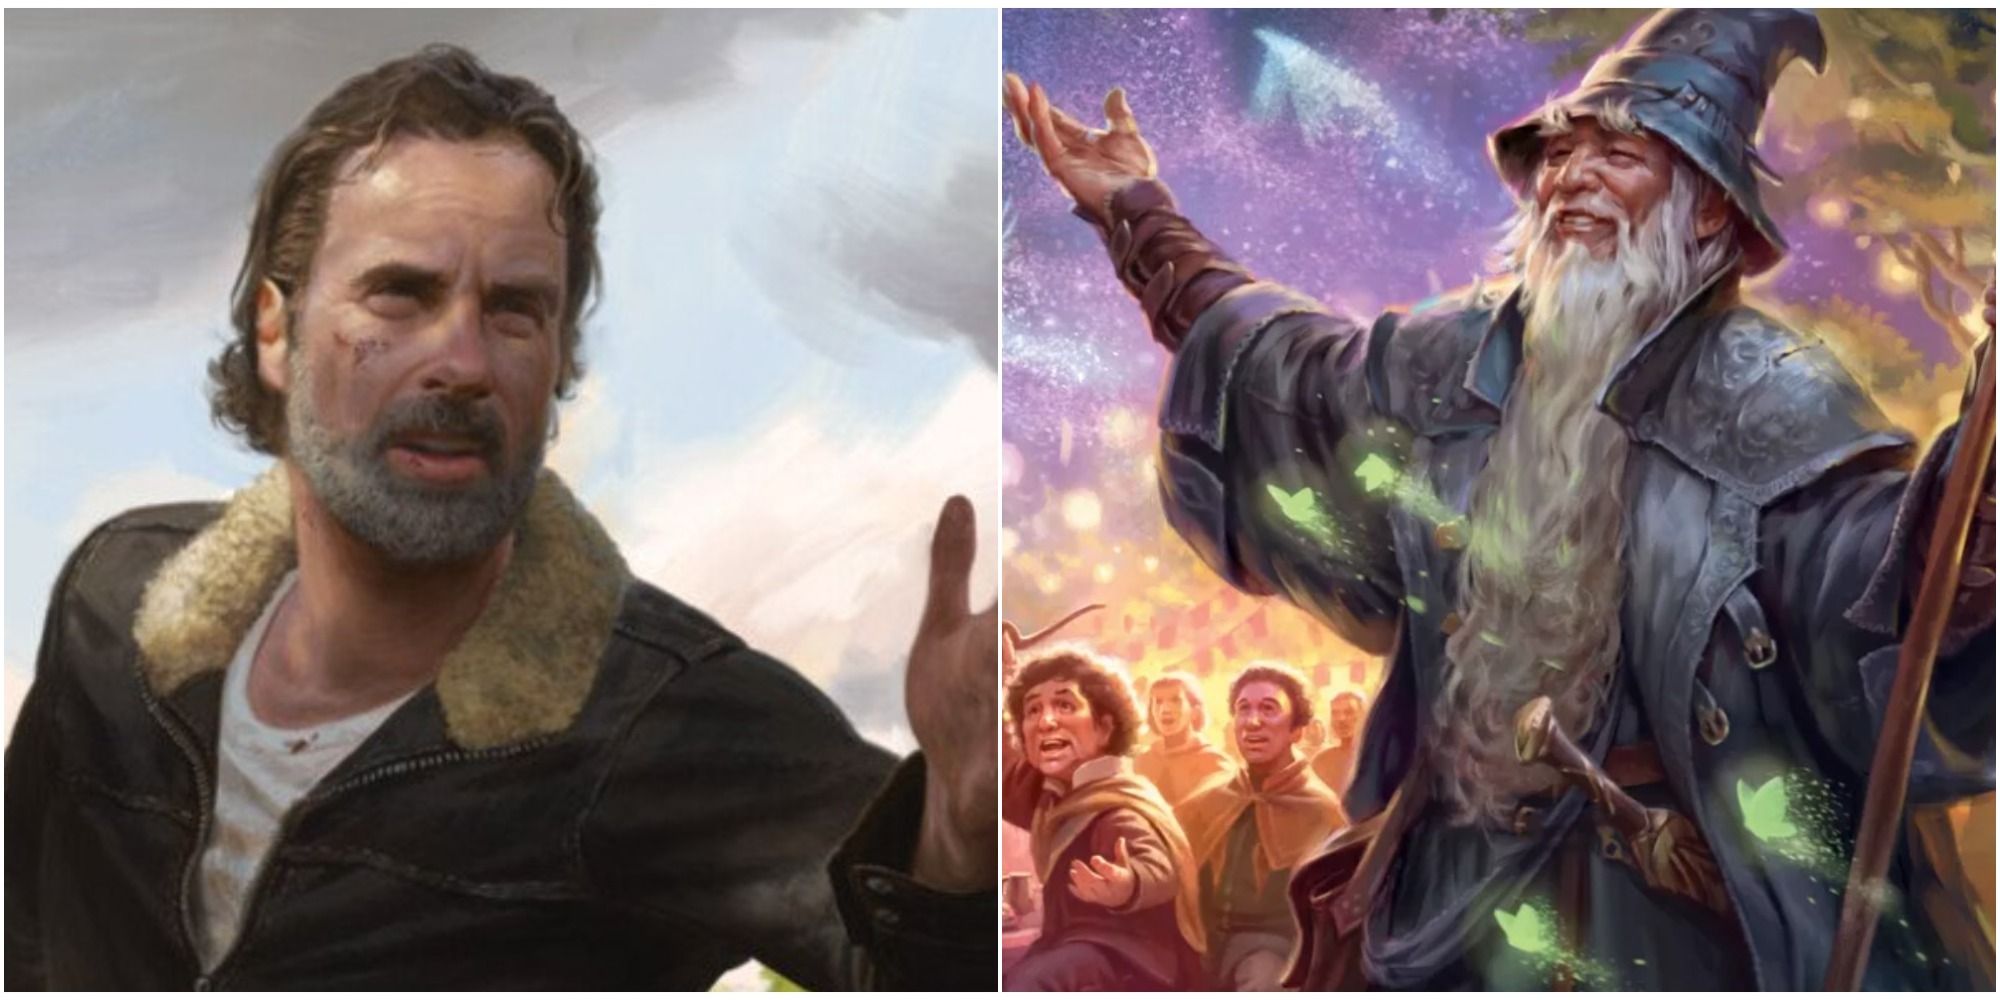 mtg universes beyond feature the walking dead and lord of the rings